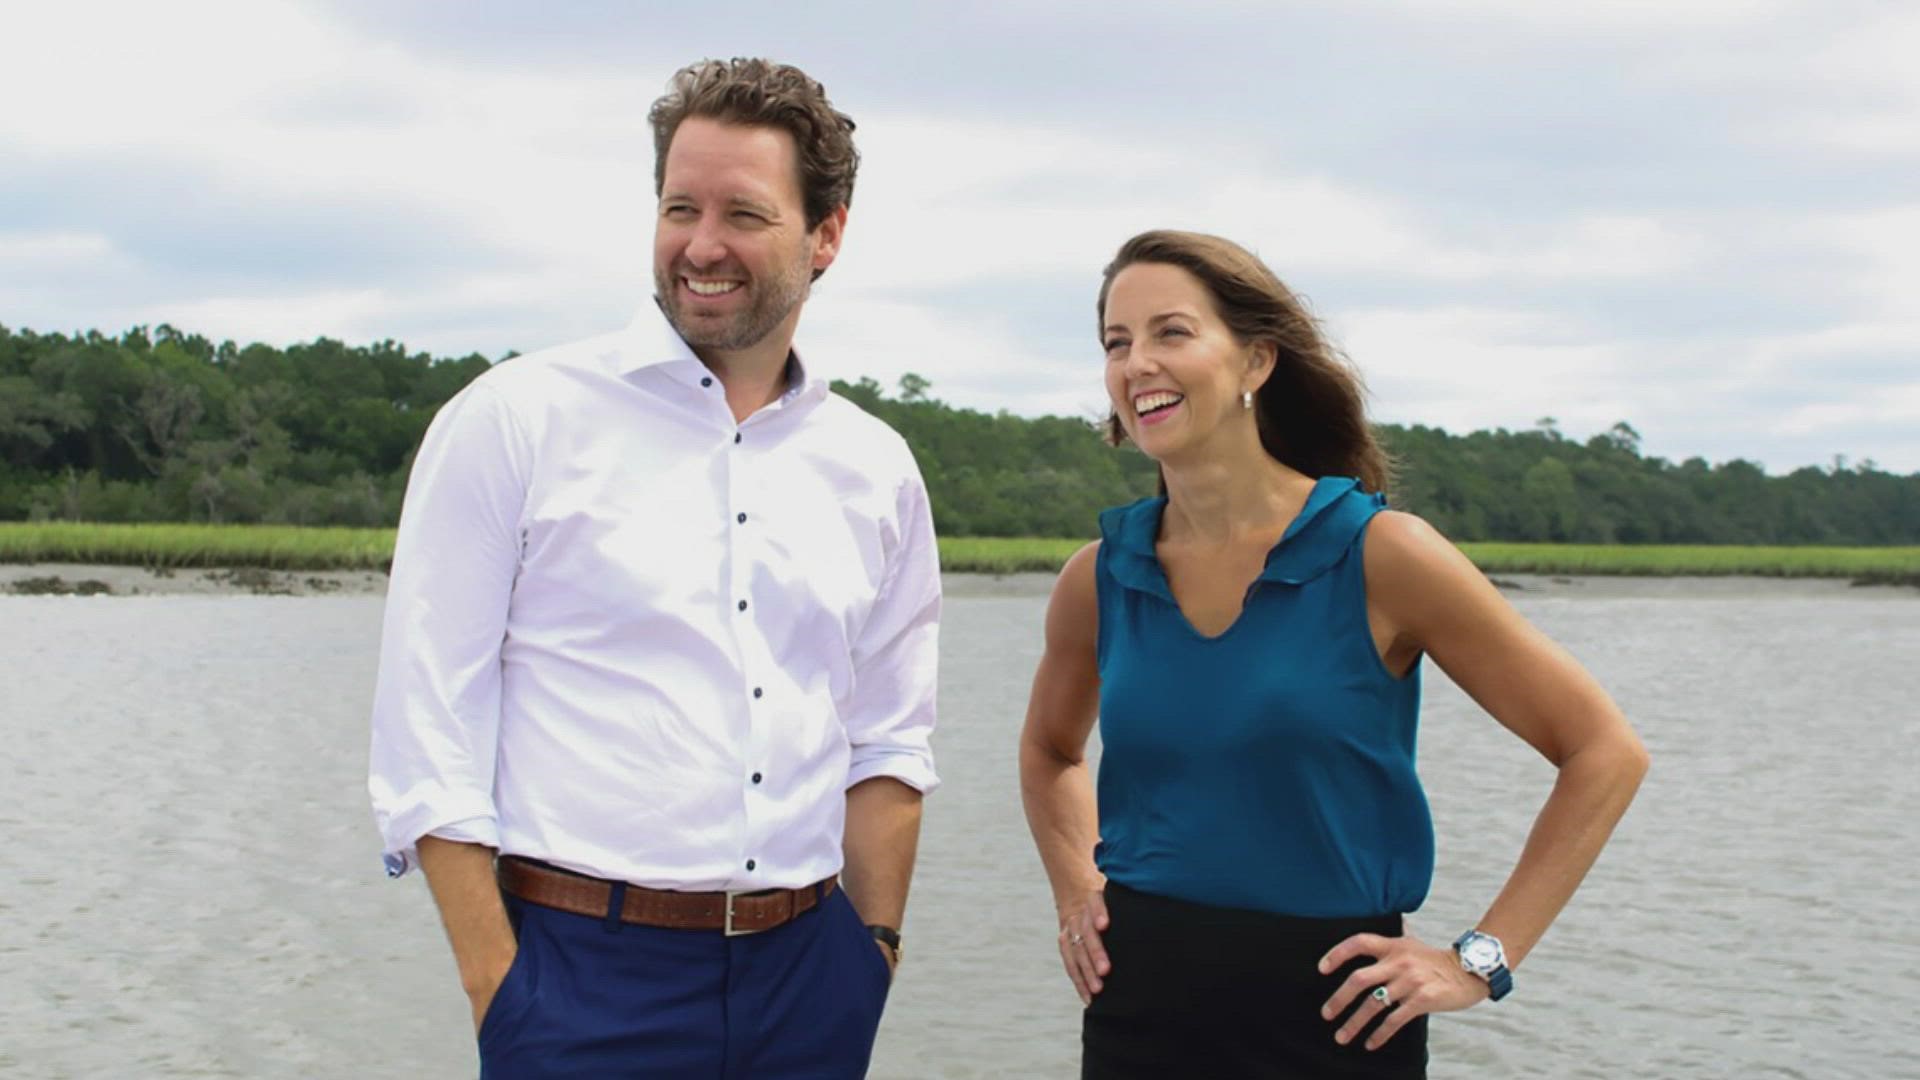 Joe Cunningham has chosen Tally Parham Casey, a civil litigator who flew fighter jets during three combat tours over Iraq, as his running mate.